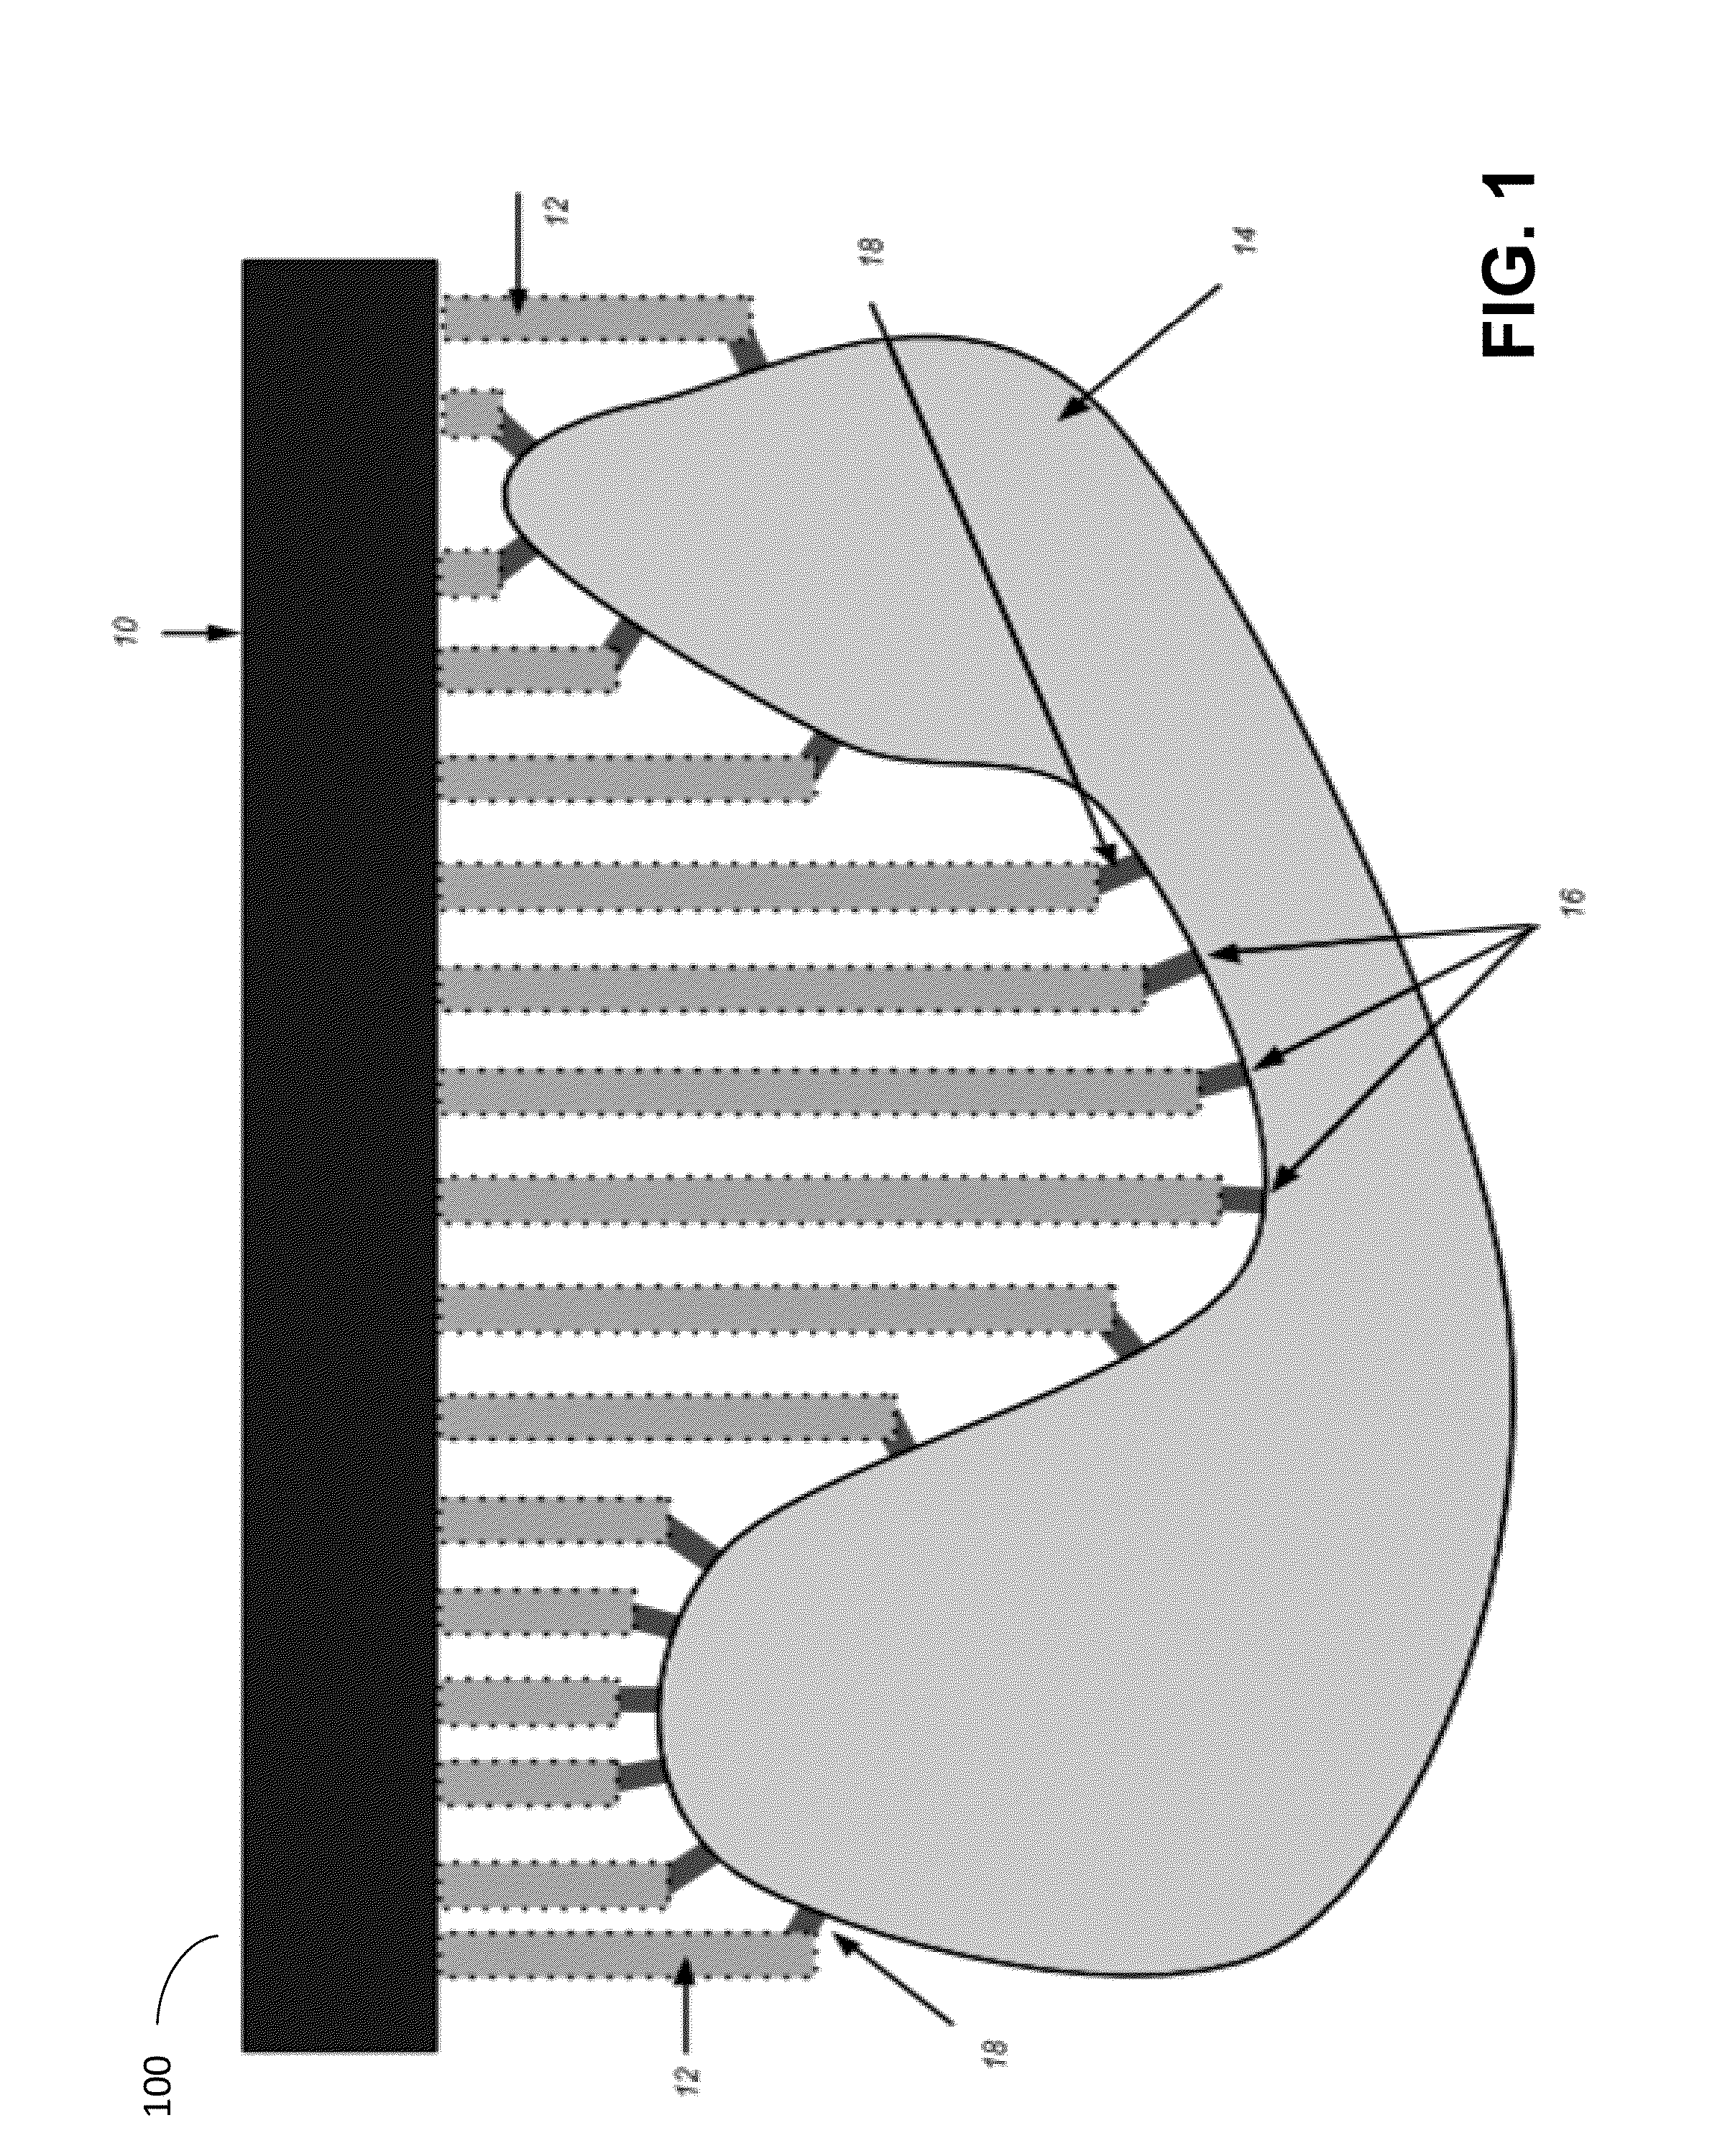 Additive fabrication support structures